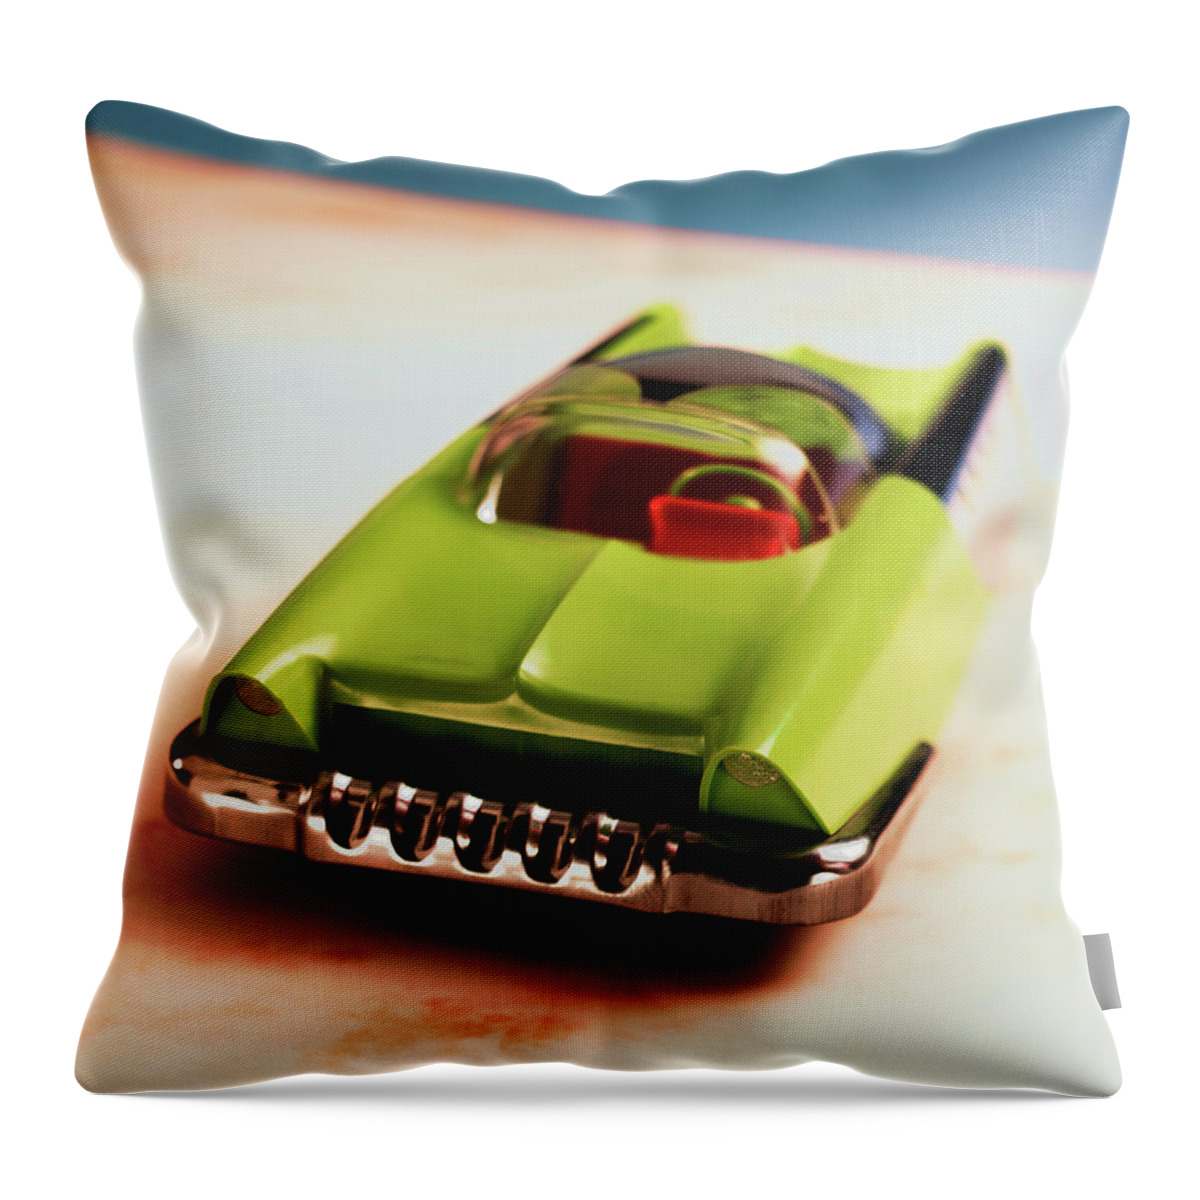 Auto Throw Pillow featuring the drawing Futuristic Green Car by CSA Images